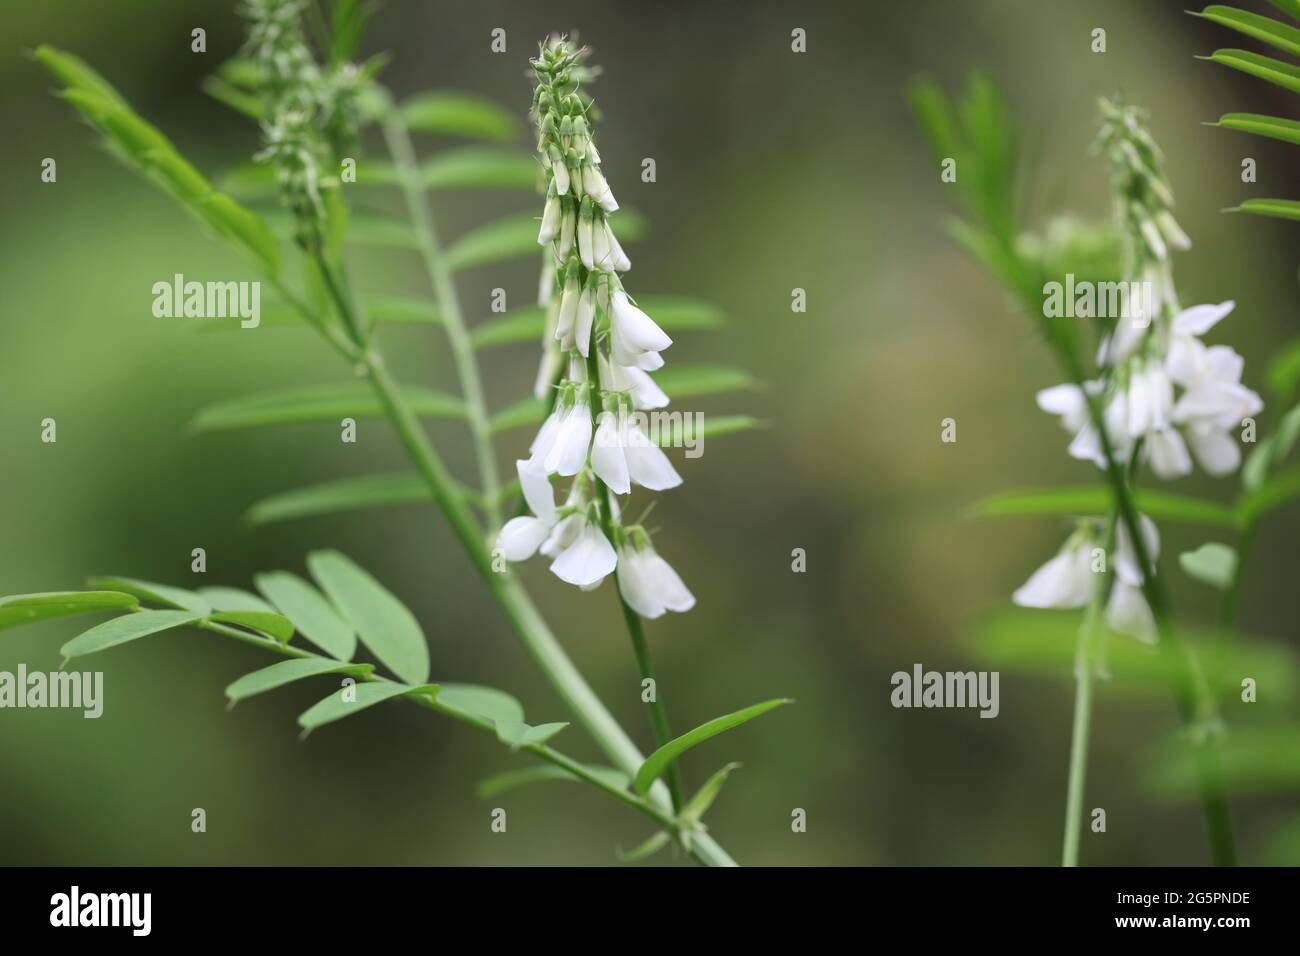 Close-up of White-flowering Goats Rue / Galega officinalis L. Stock Photo